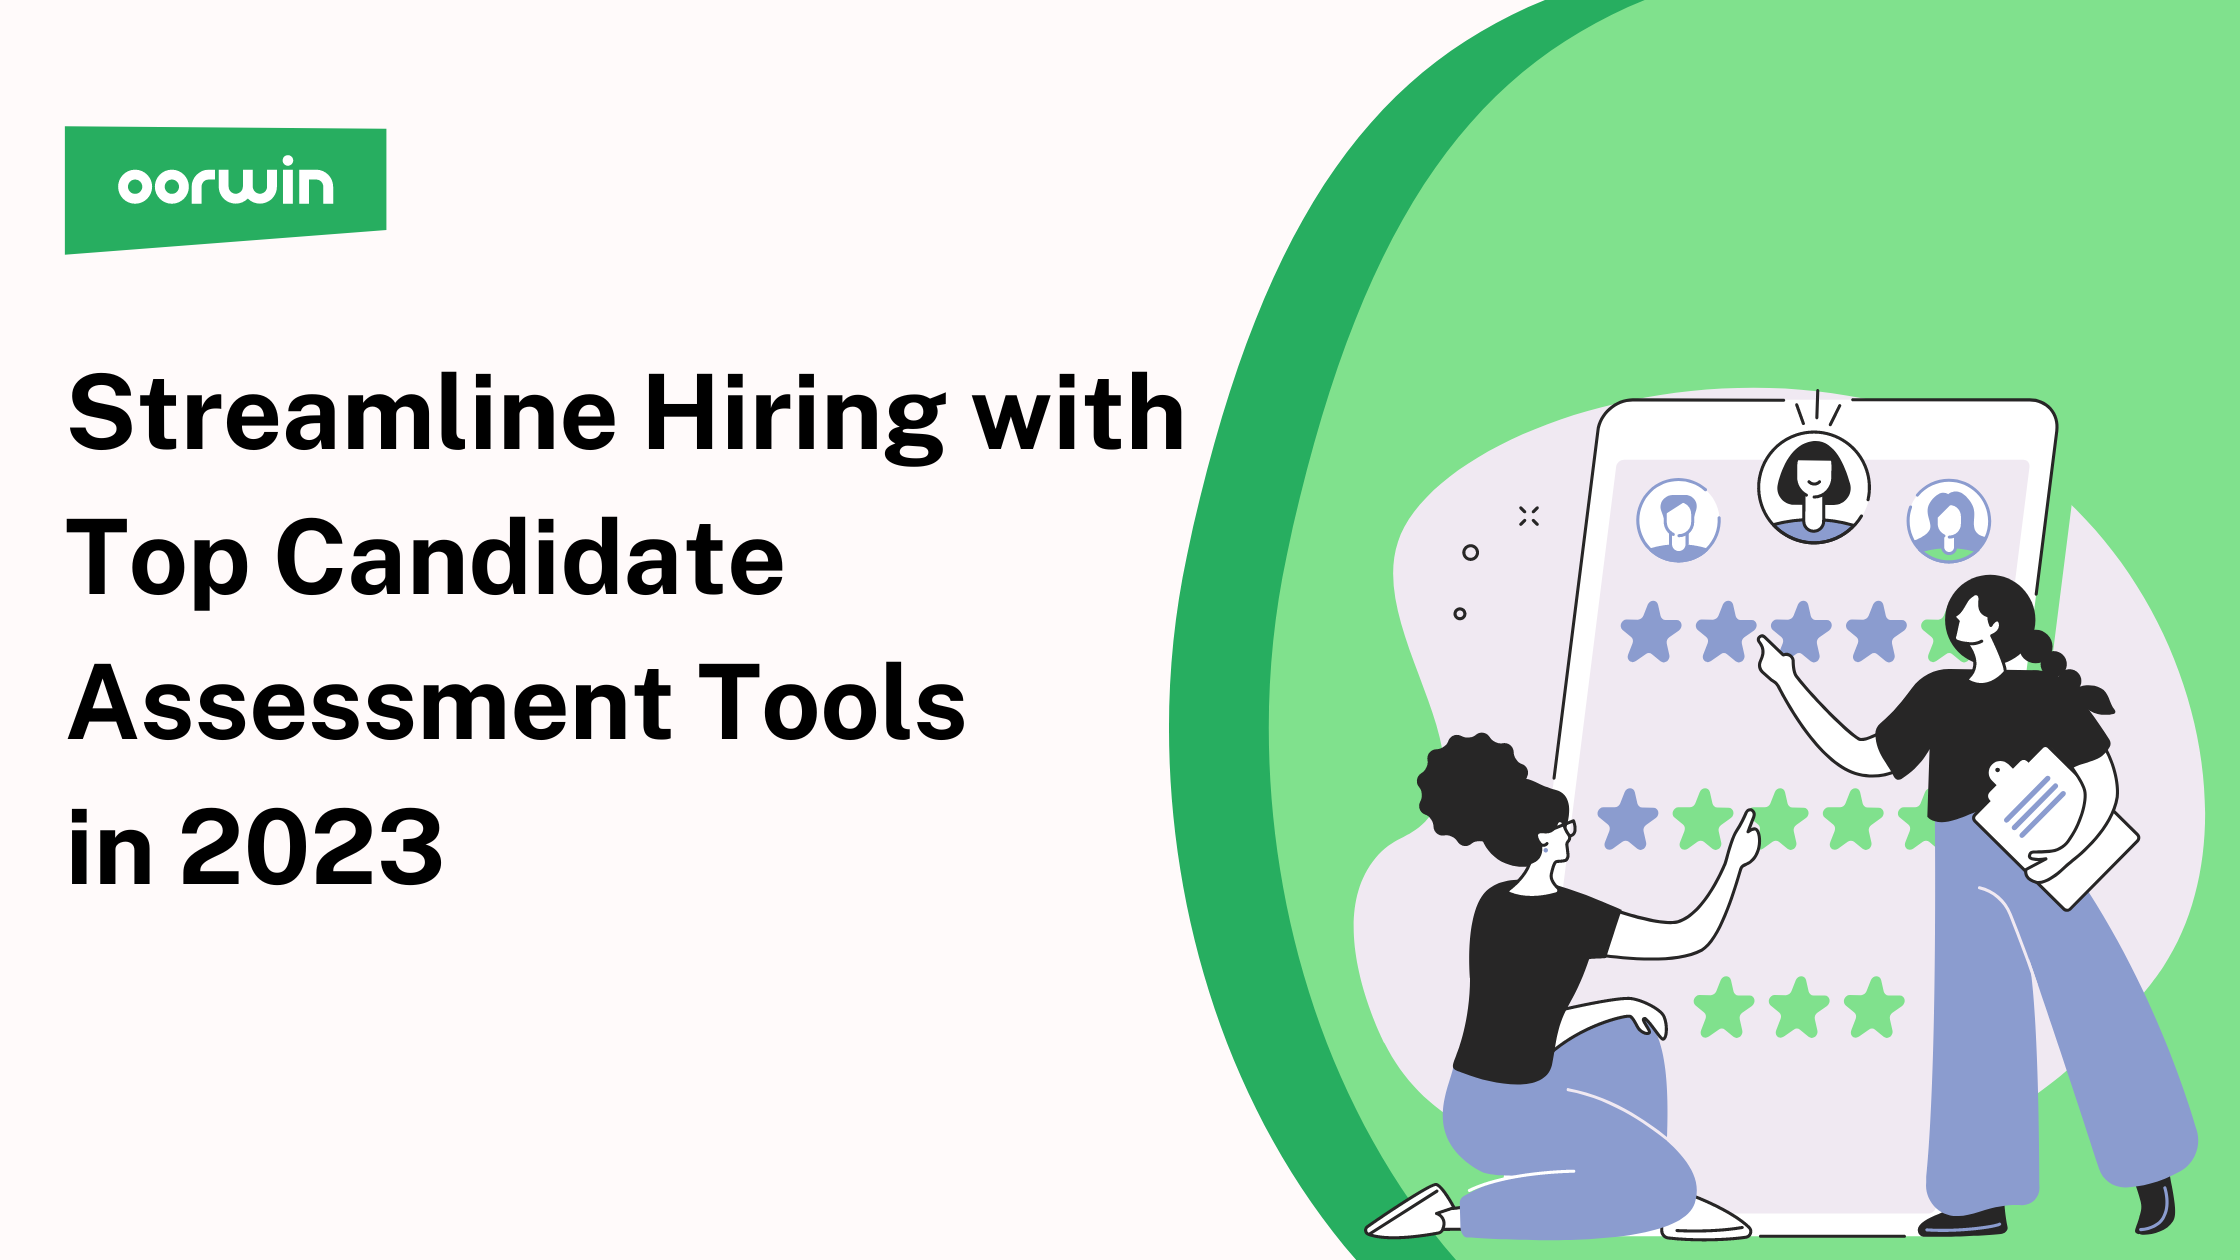 Streamline Hiring with Top Candidate Assessment Tools in 2023